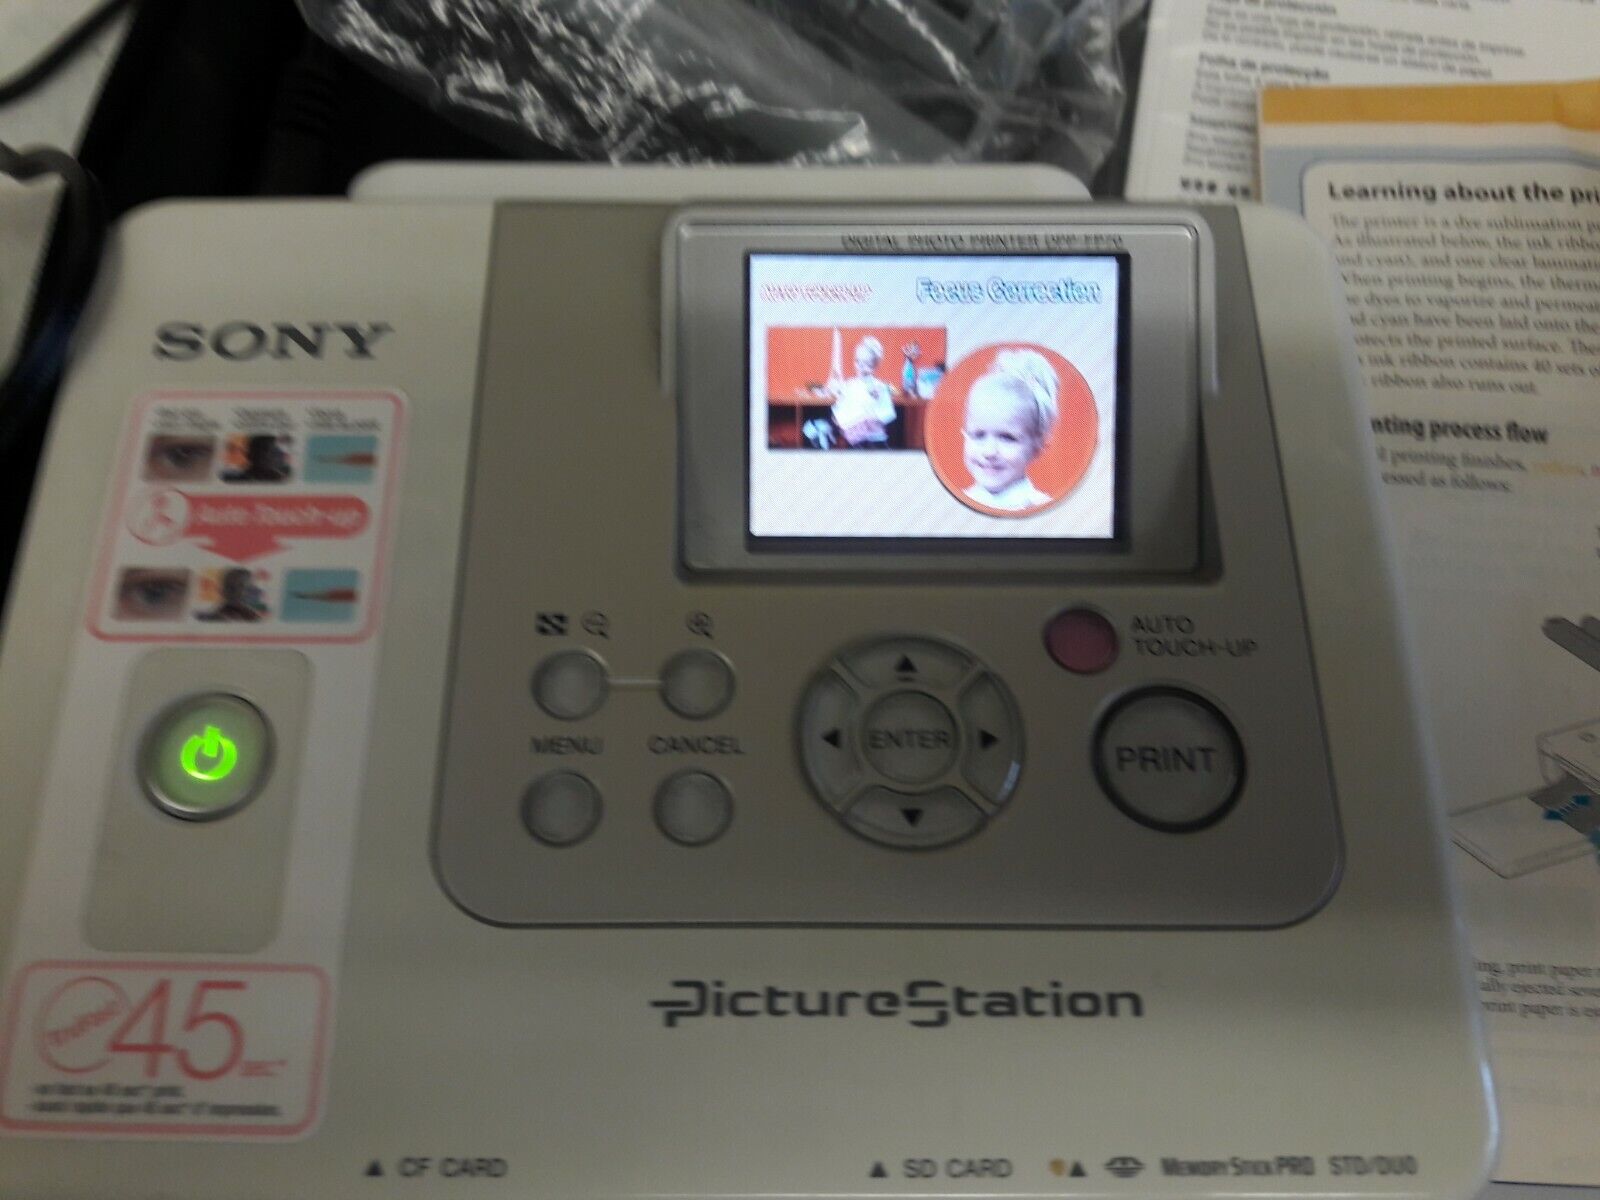 sony Dpp-Fp70 picture station 